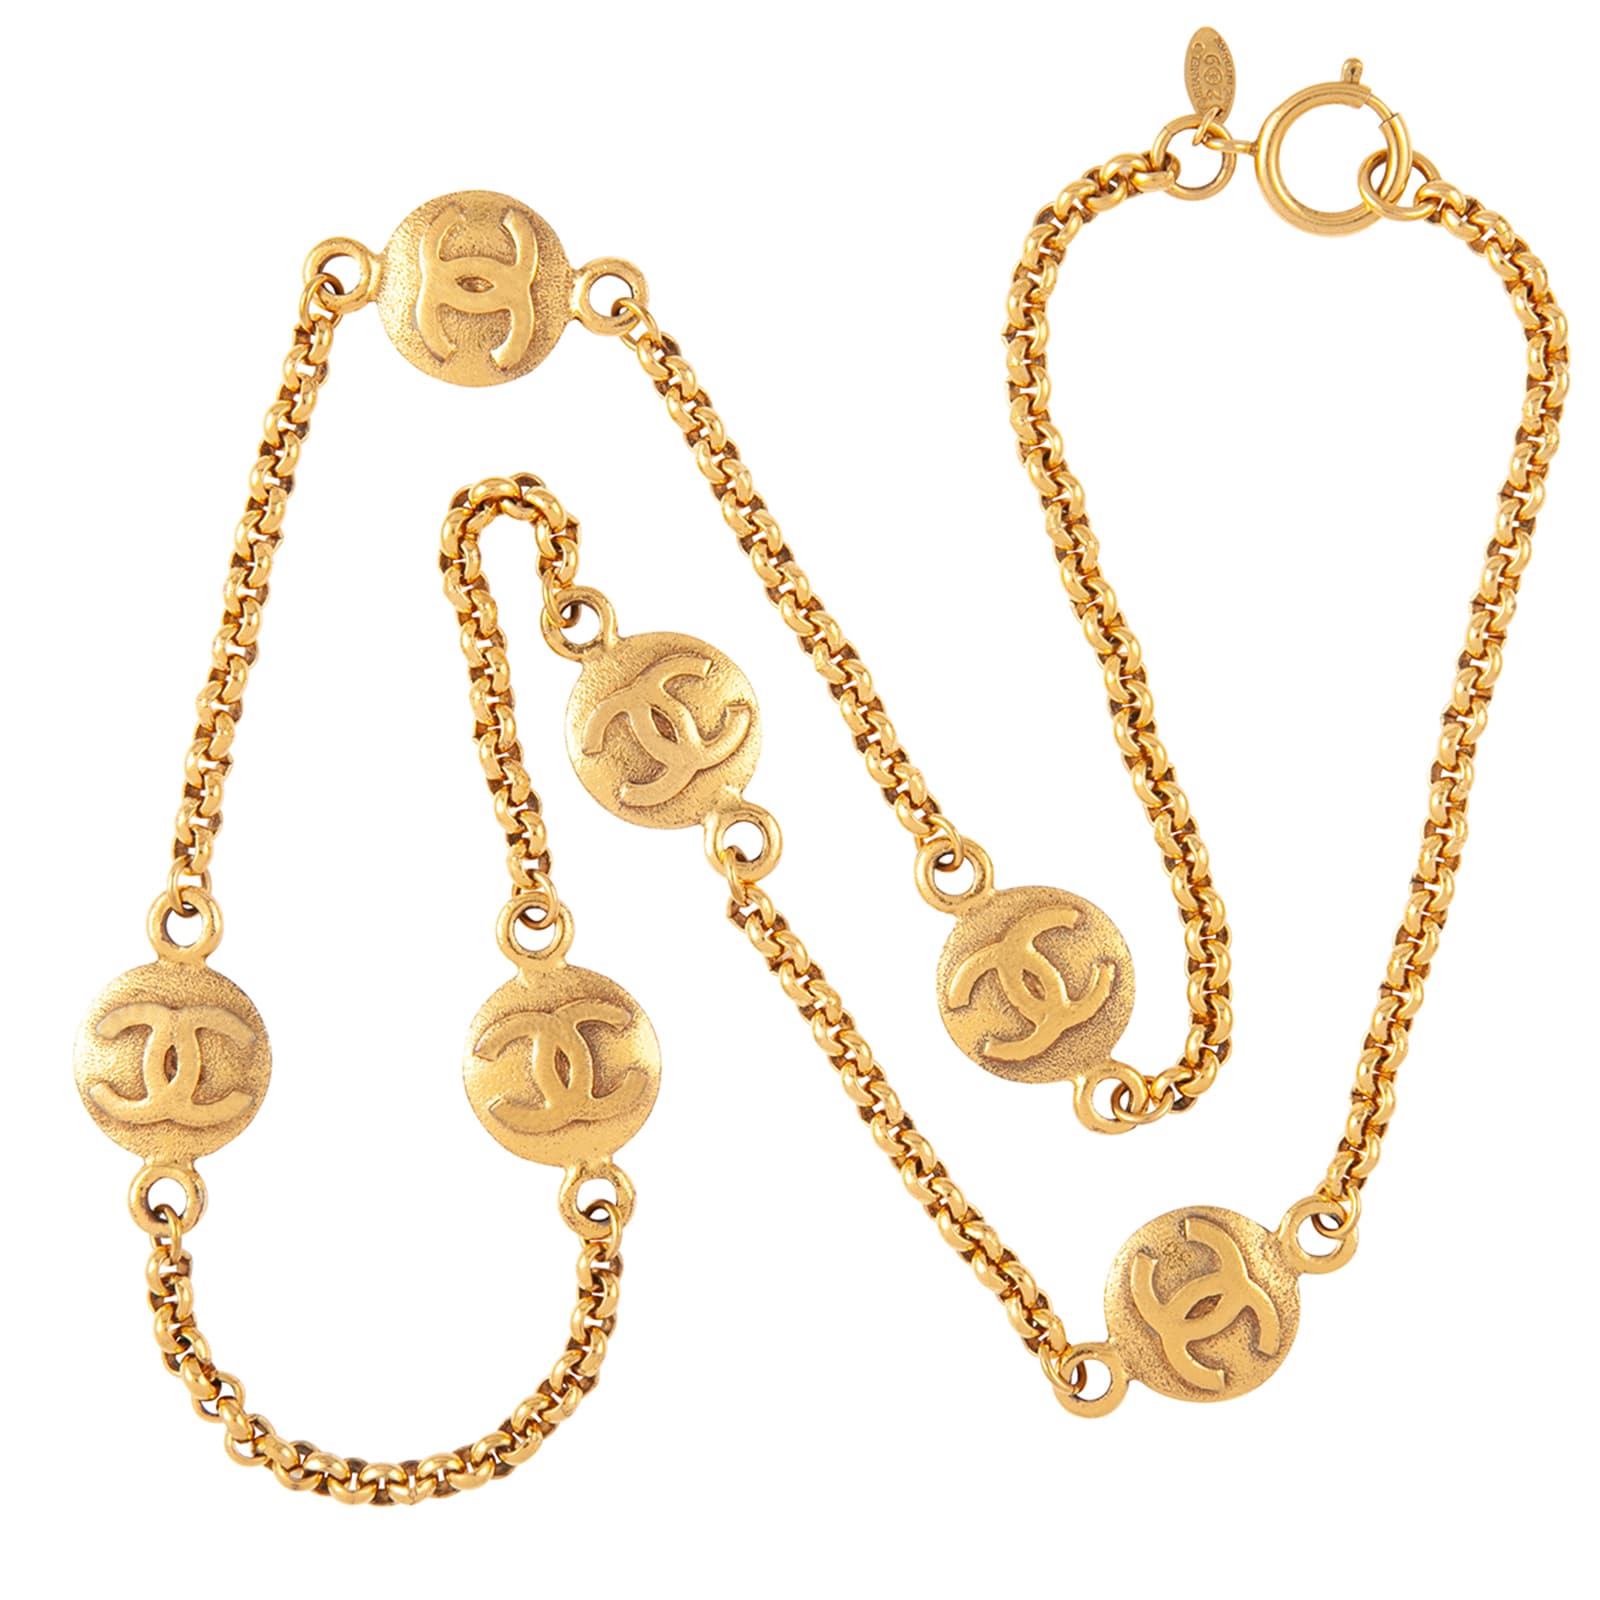 Vintage CHANEL Golden Chain Necklace With Round CC Mark Charm  Etsy  Singapore